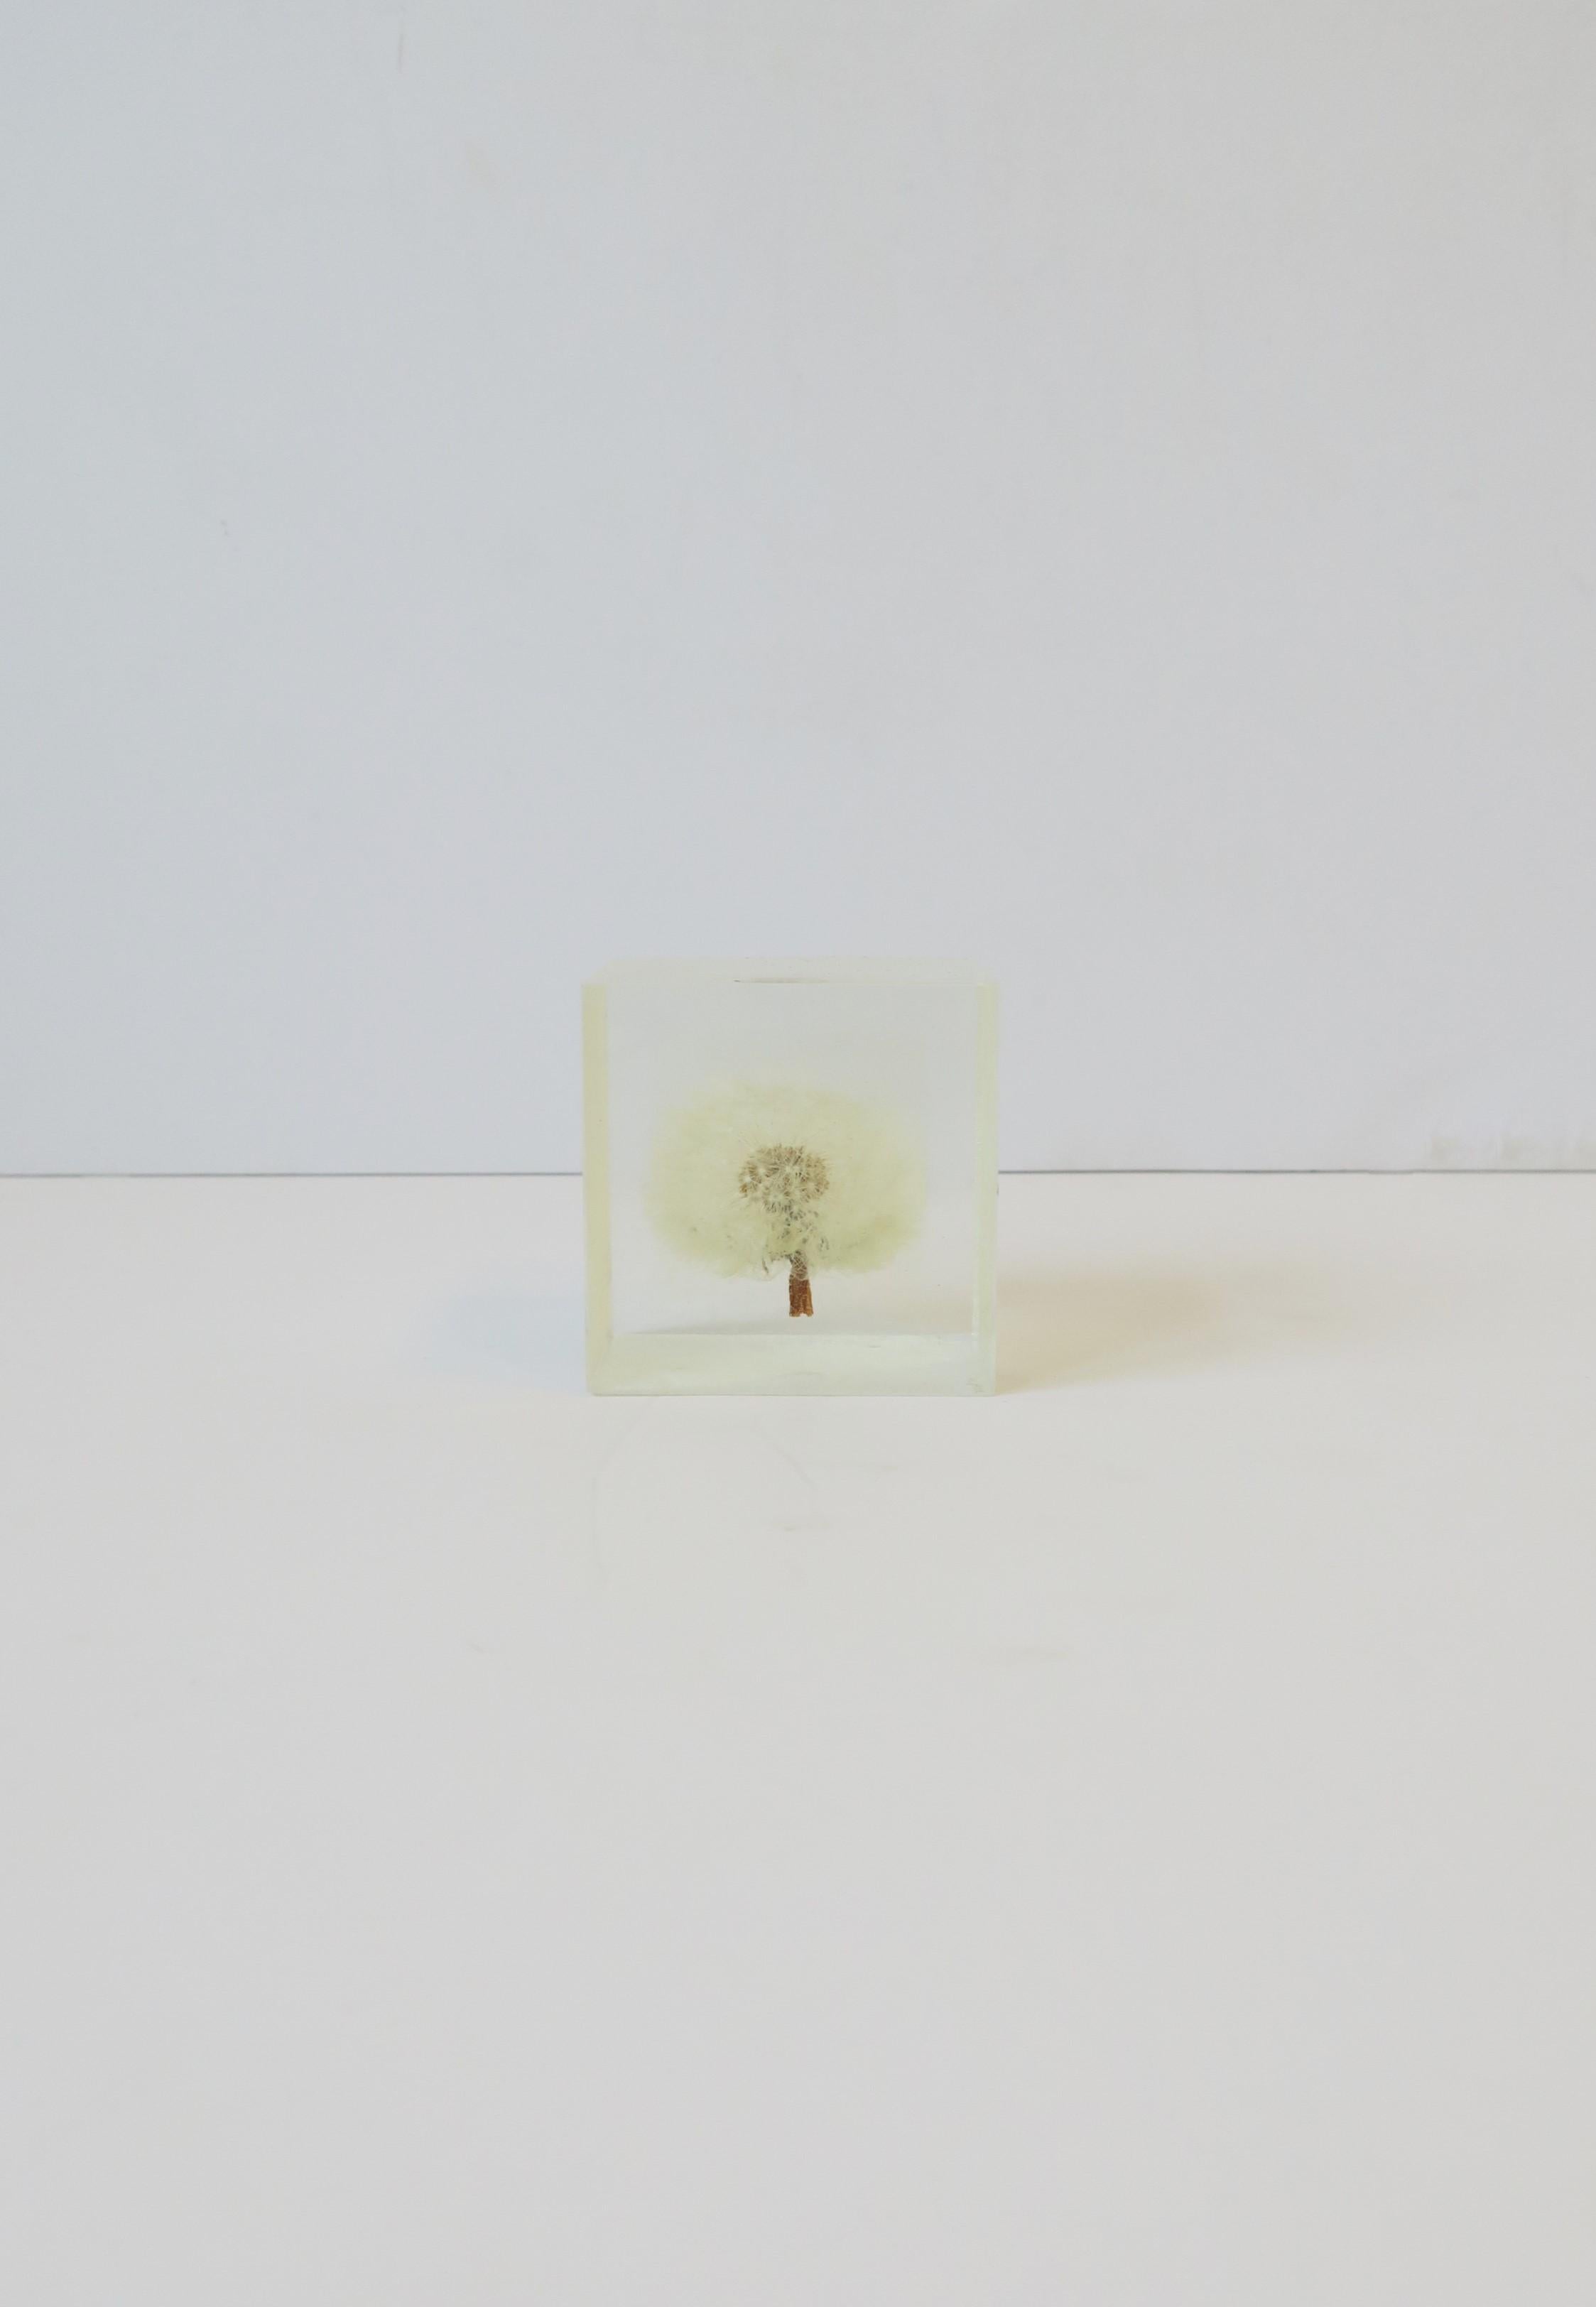 A beautiful Lucite or acrylic cube with encased dandelion flower seed-head decorative object or desk accessory, circa 20th century, 1960s - 1970s. Art meets nature meets technology. Piece measures: 2.07